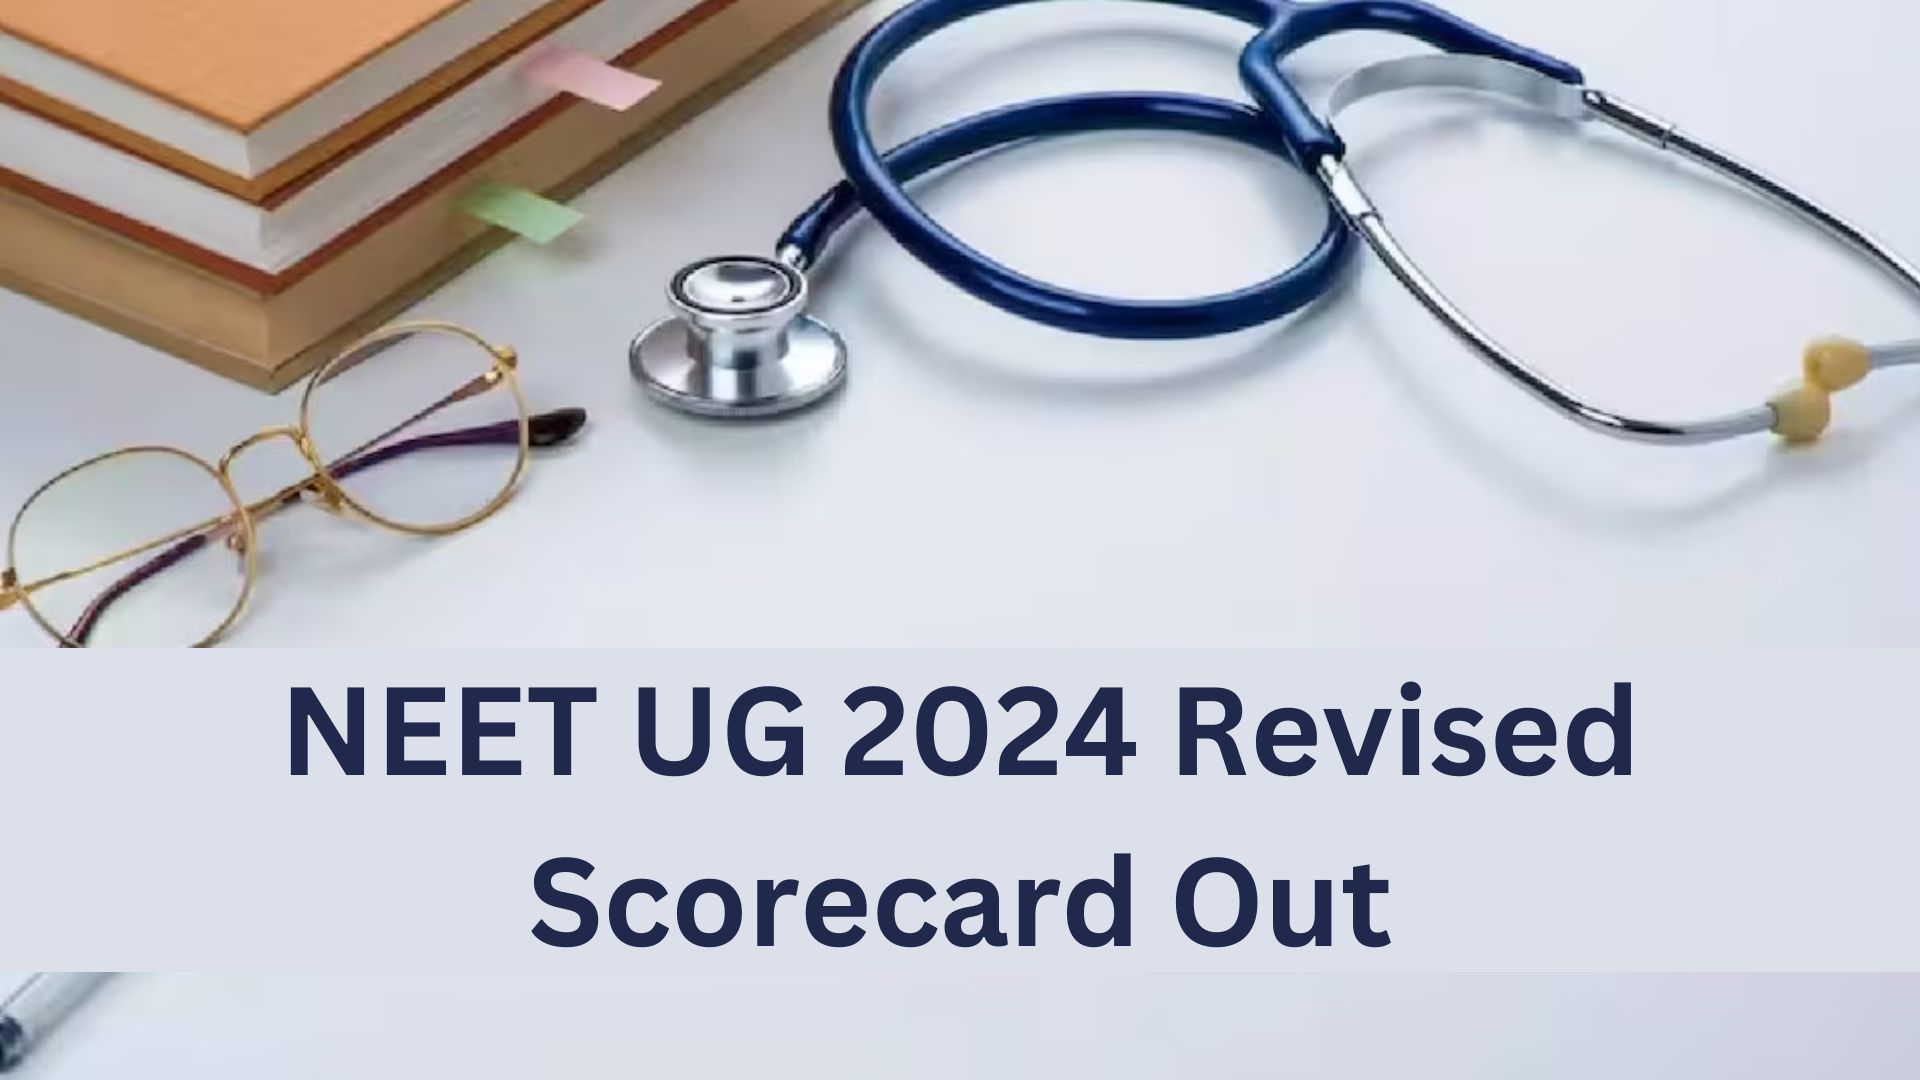 NEET UG 2024 Revised Scorecard Out Along With Final Answer Key : Click Here To Download